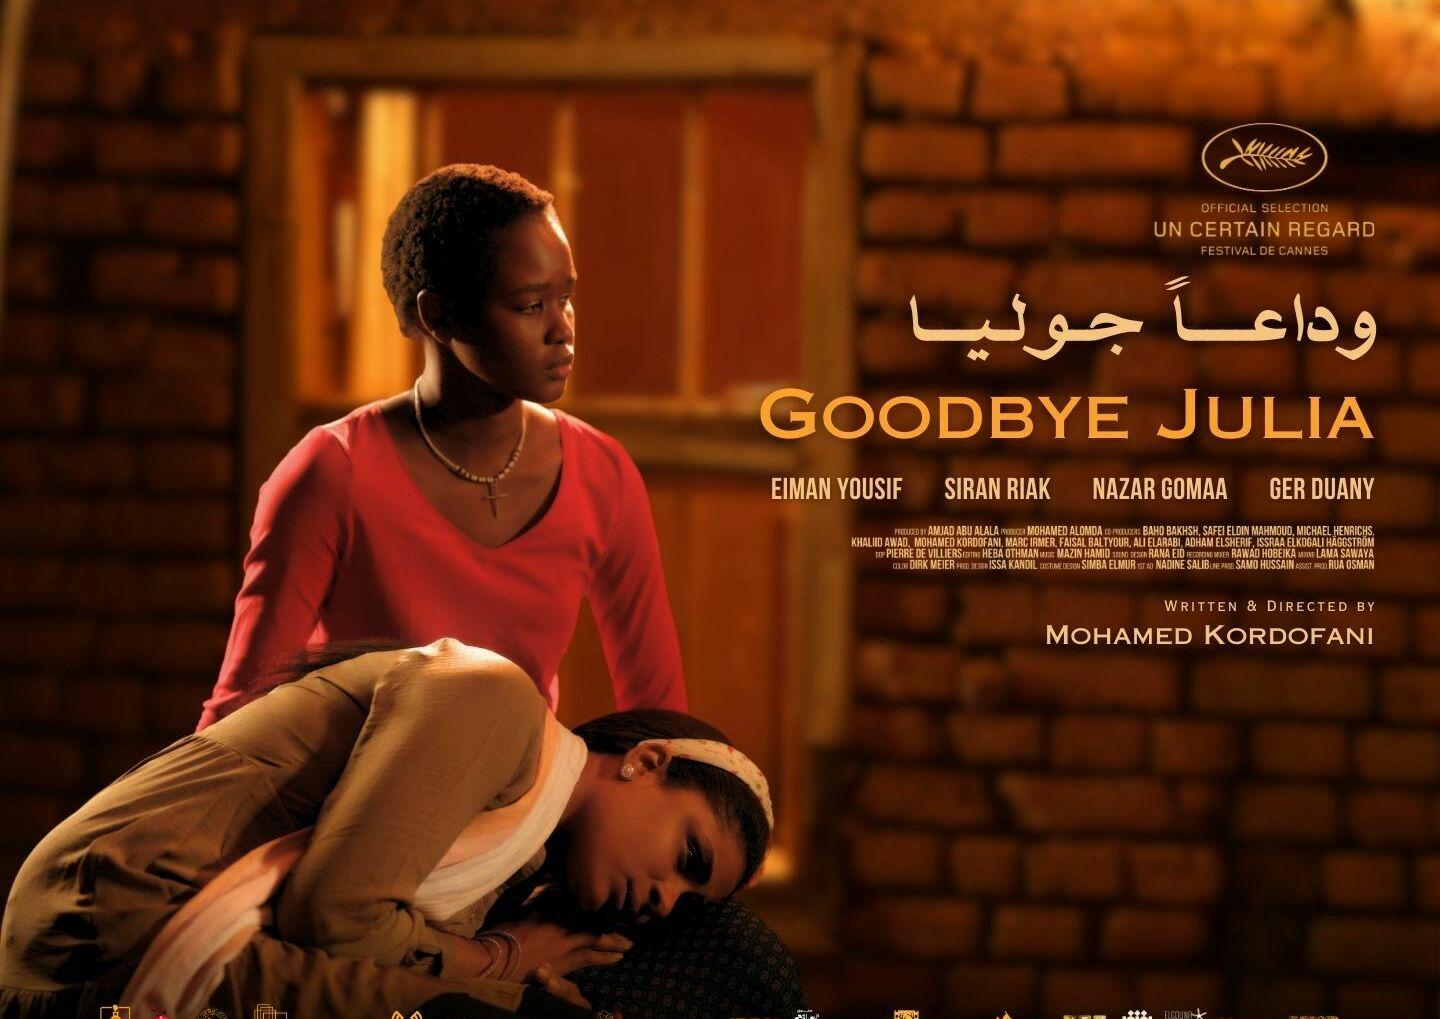 Ethnic and religious divisions fuel Sudanese film 'Goodbye Julia' : NPR